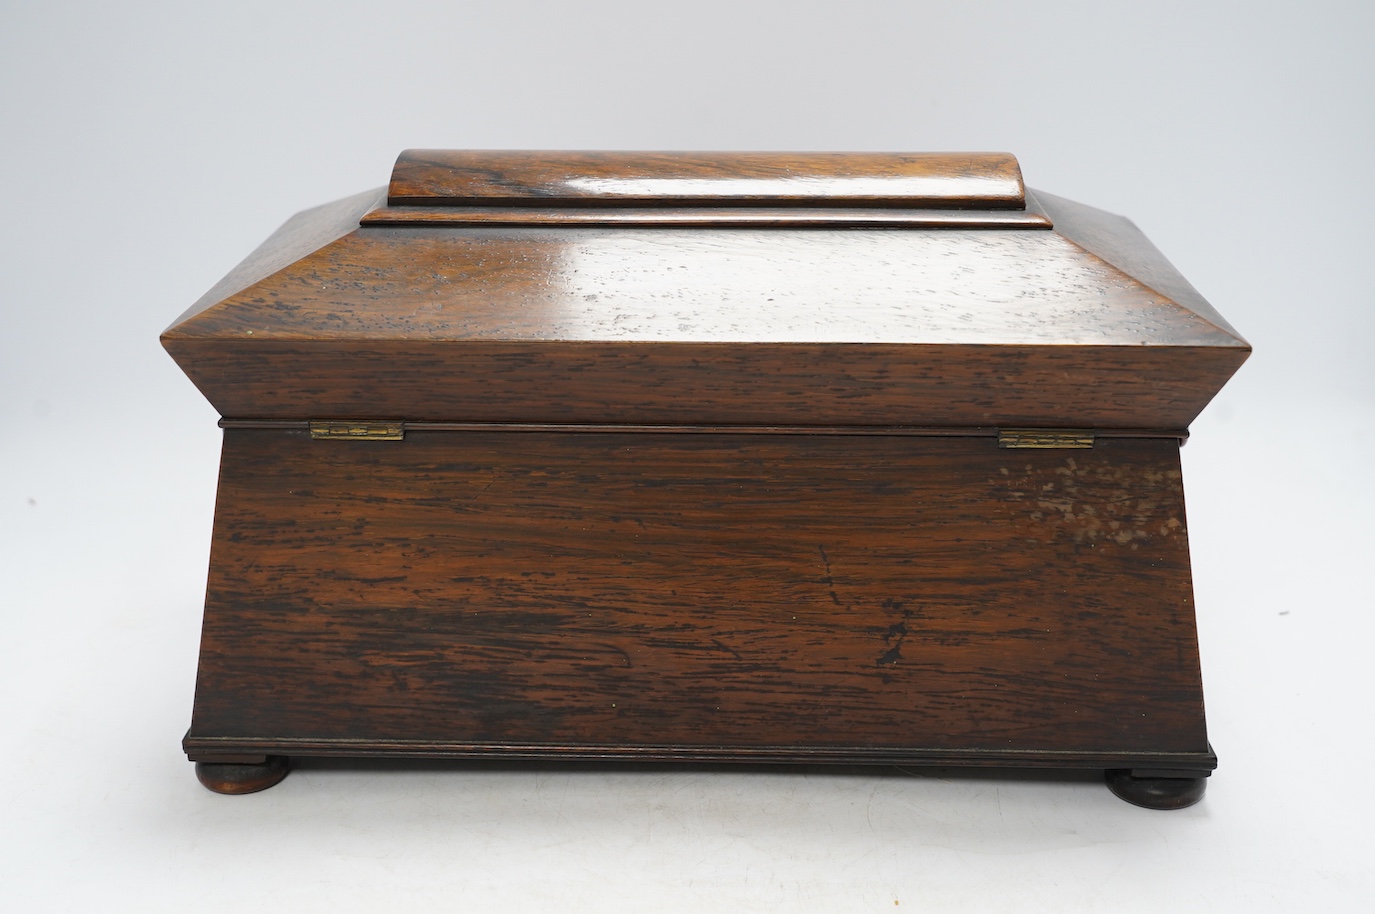 A Victorian rosewood sarcophagus shaped tea caddy with mother of pearl escutcheon, 33.5cm wide. Condition - fair, some internal damage